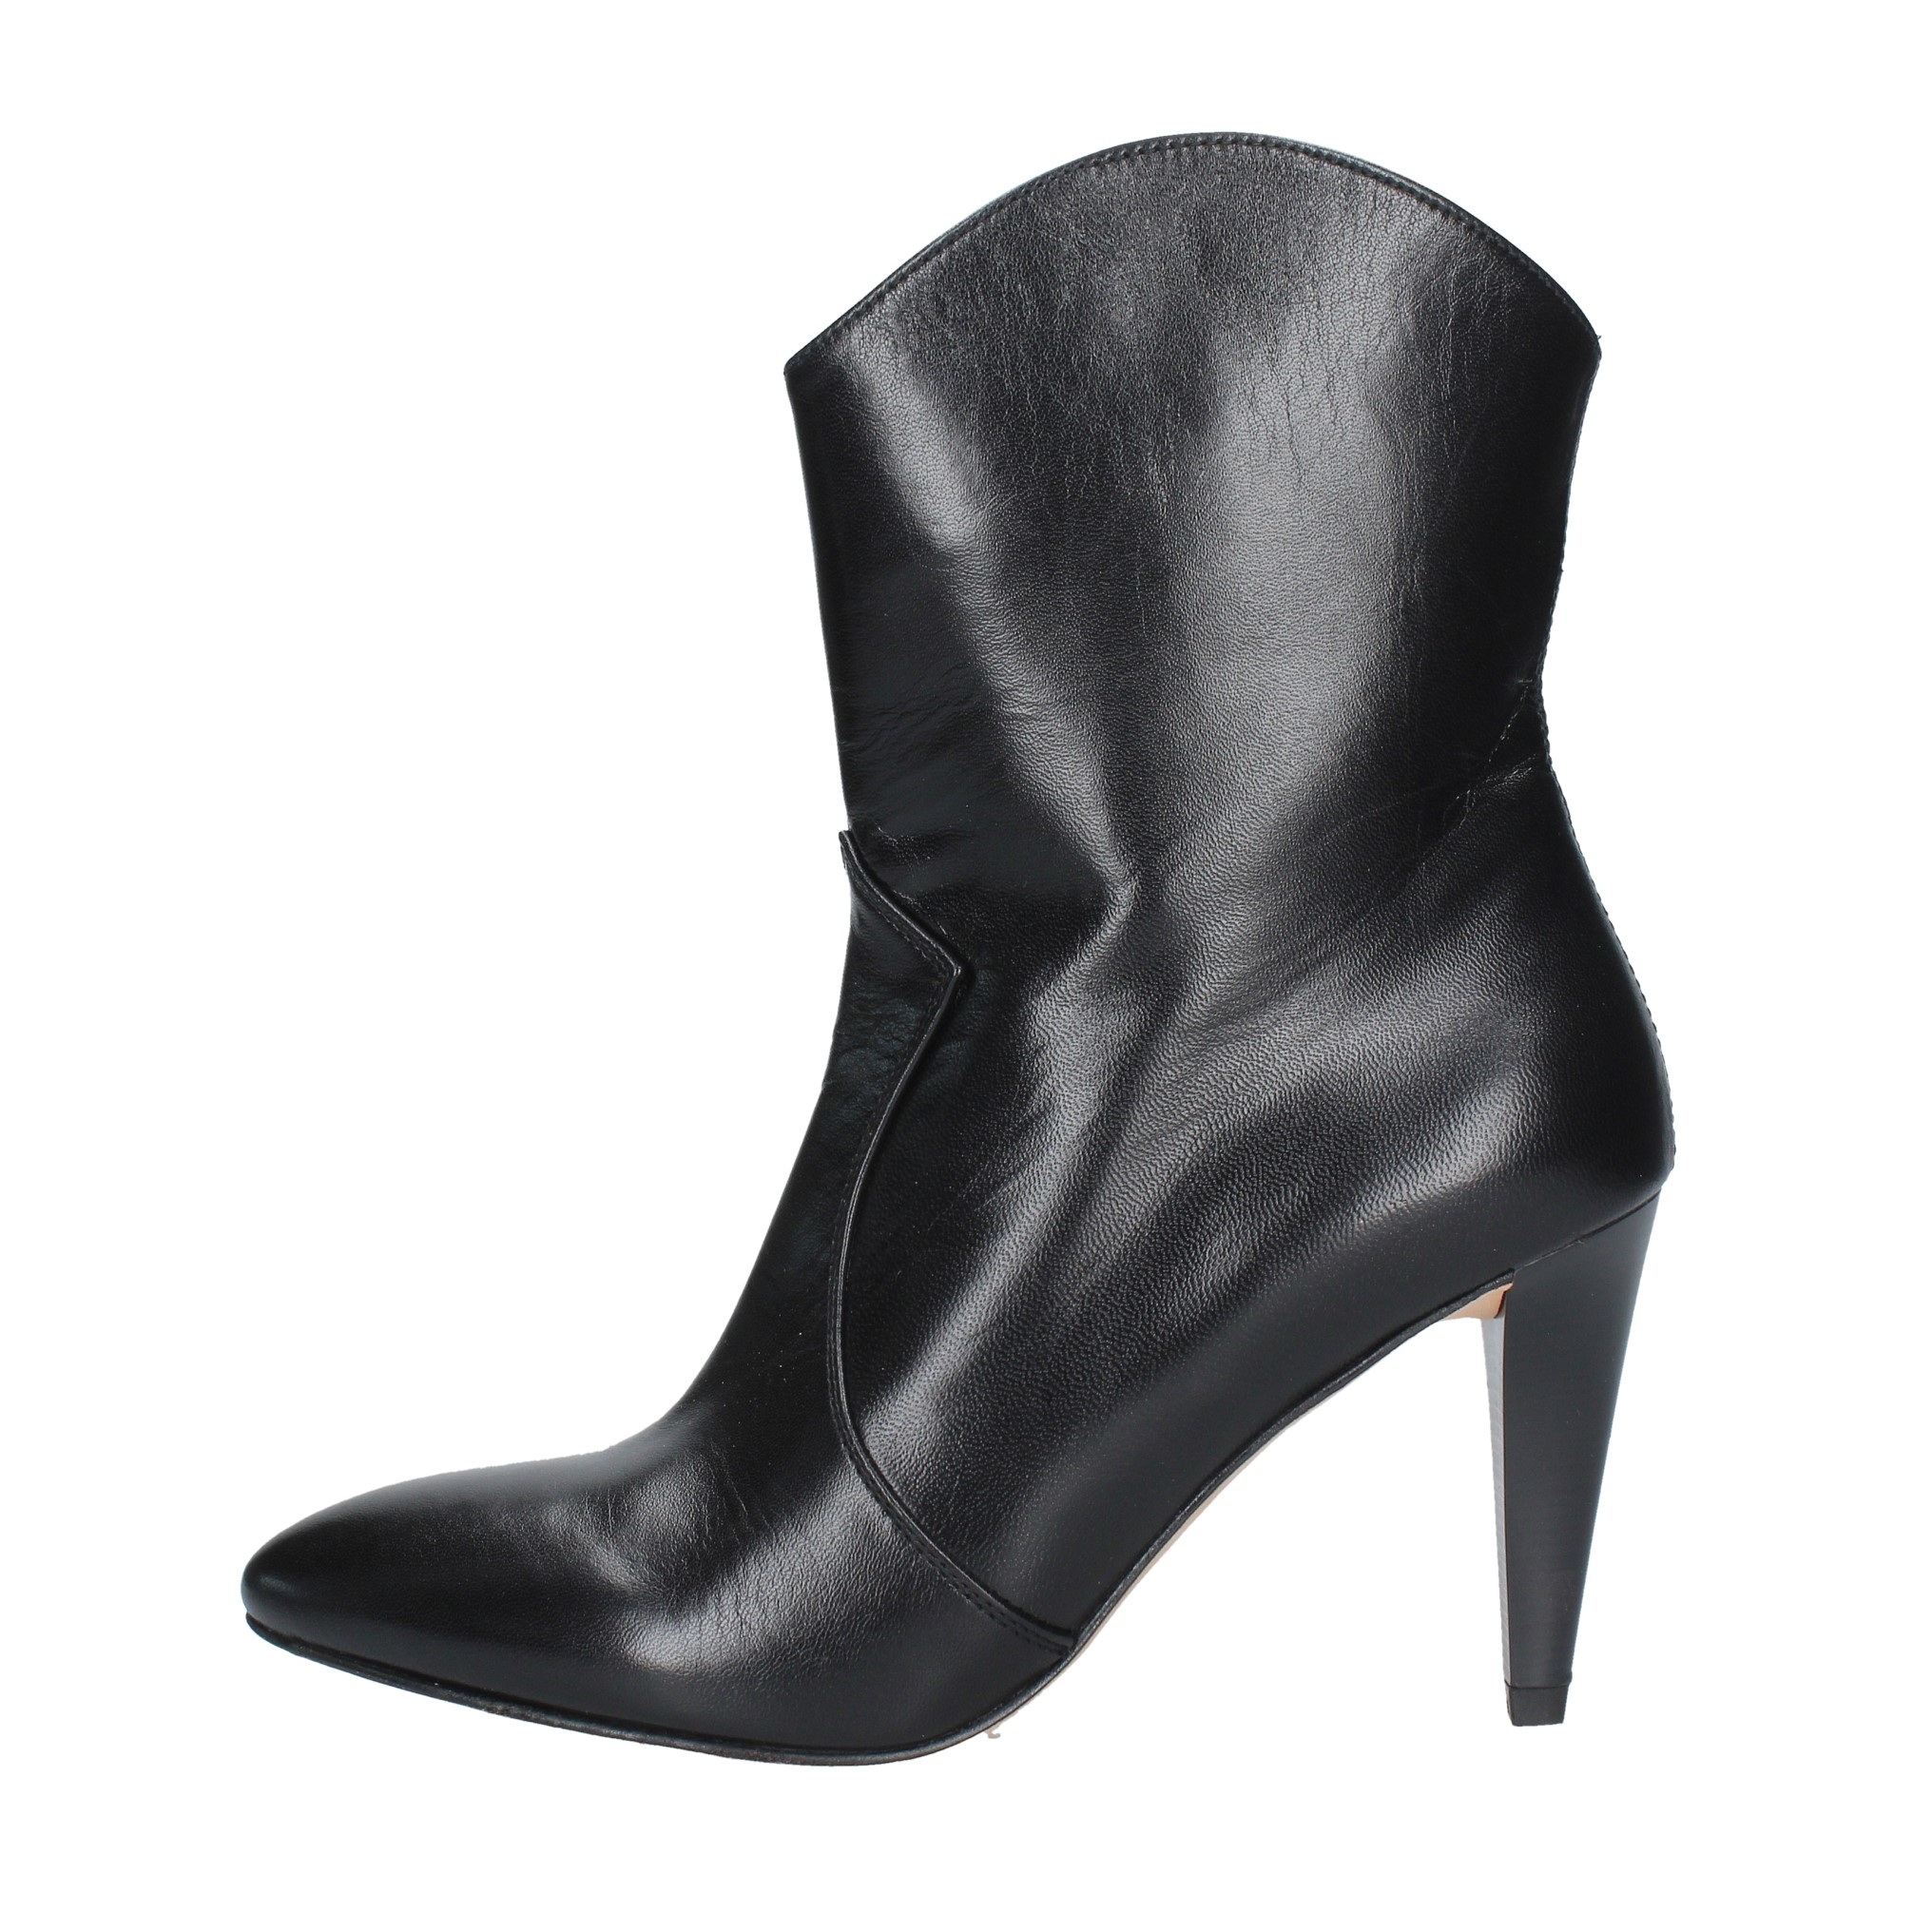 Ankle and ankle boots Black - UNISA - Ginevra calzature